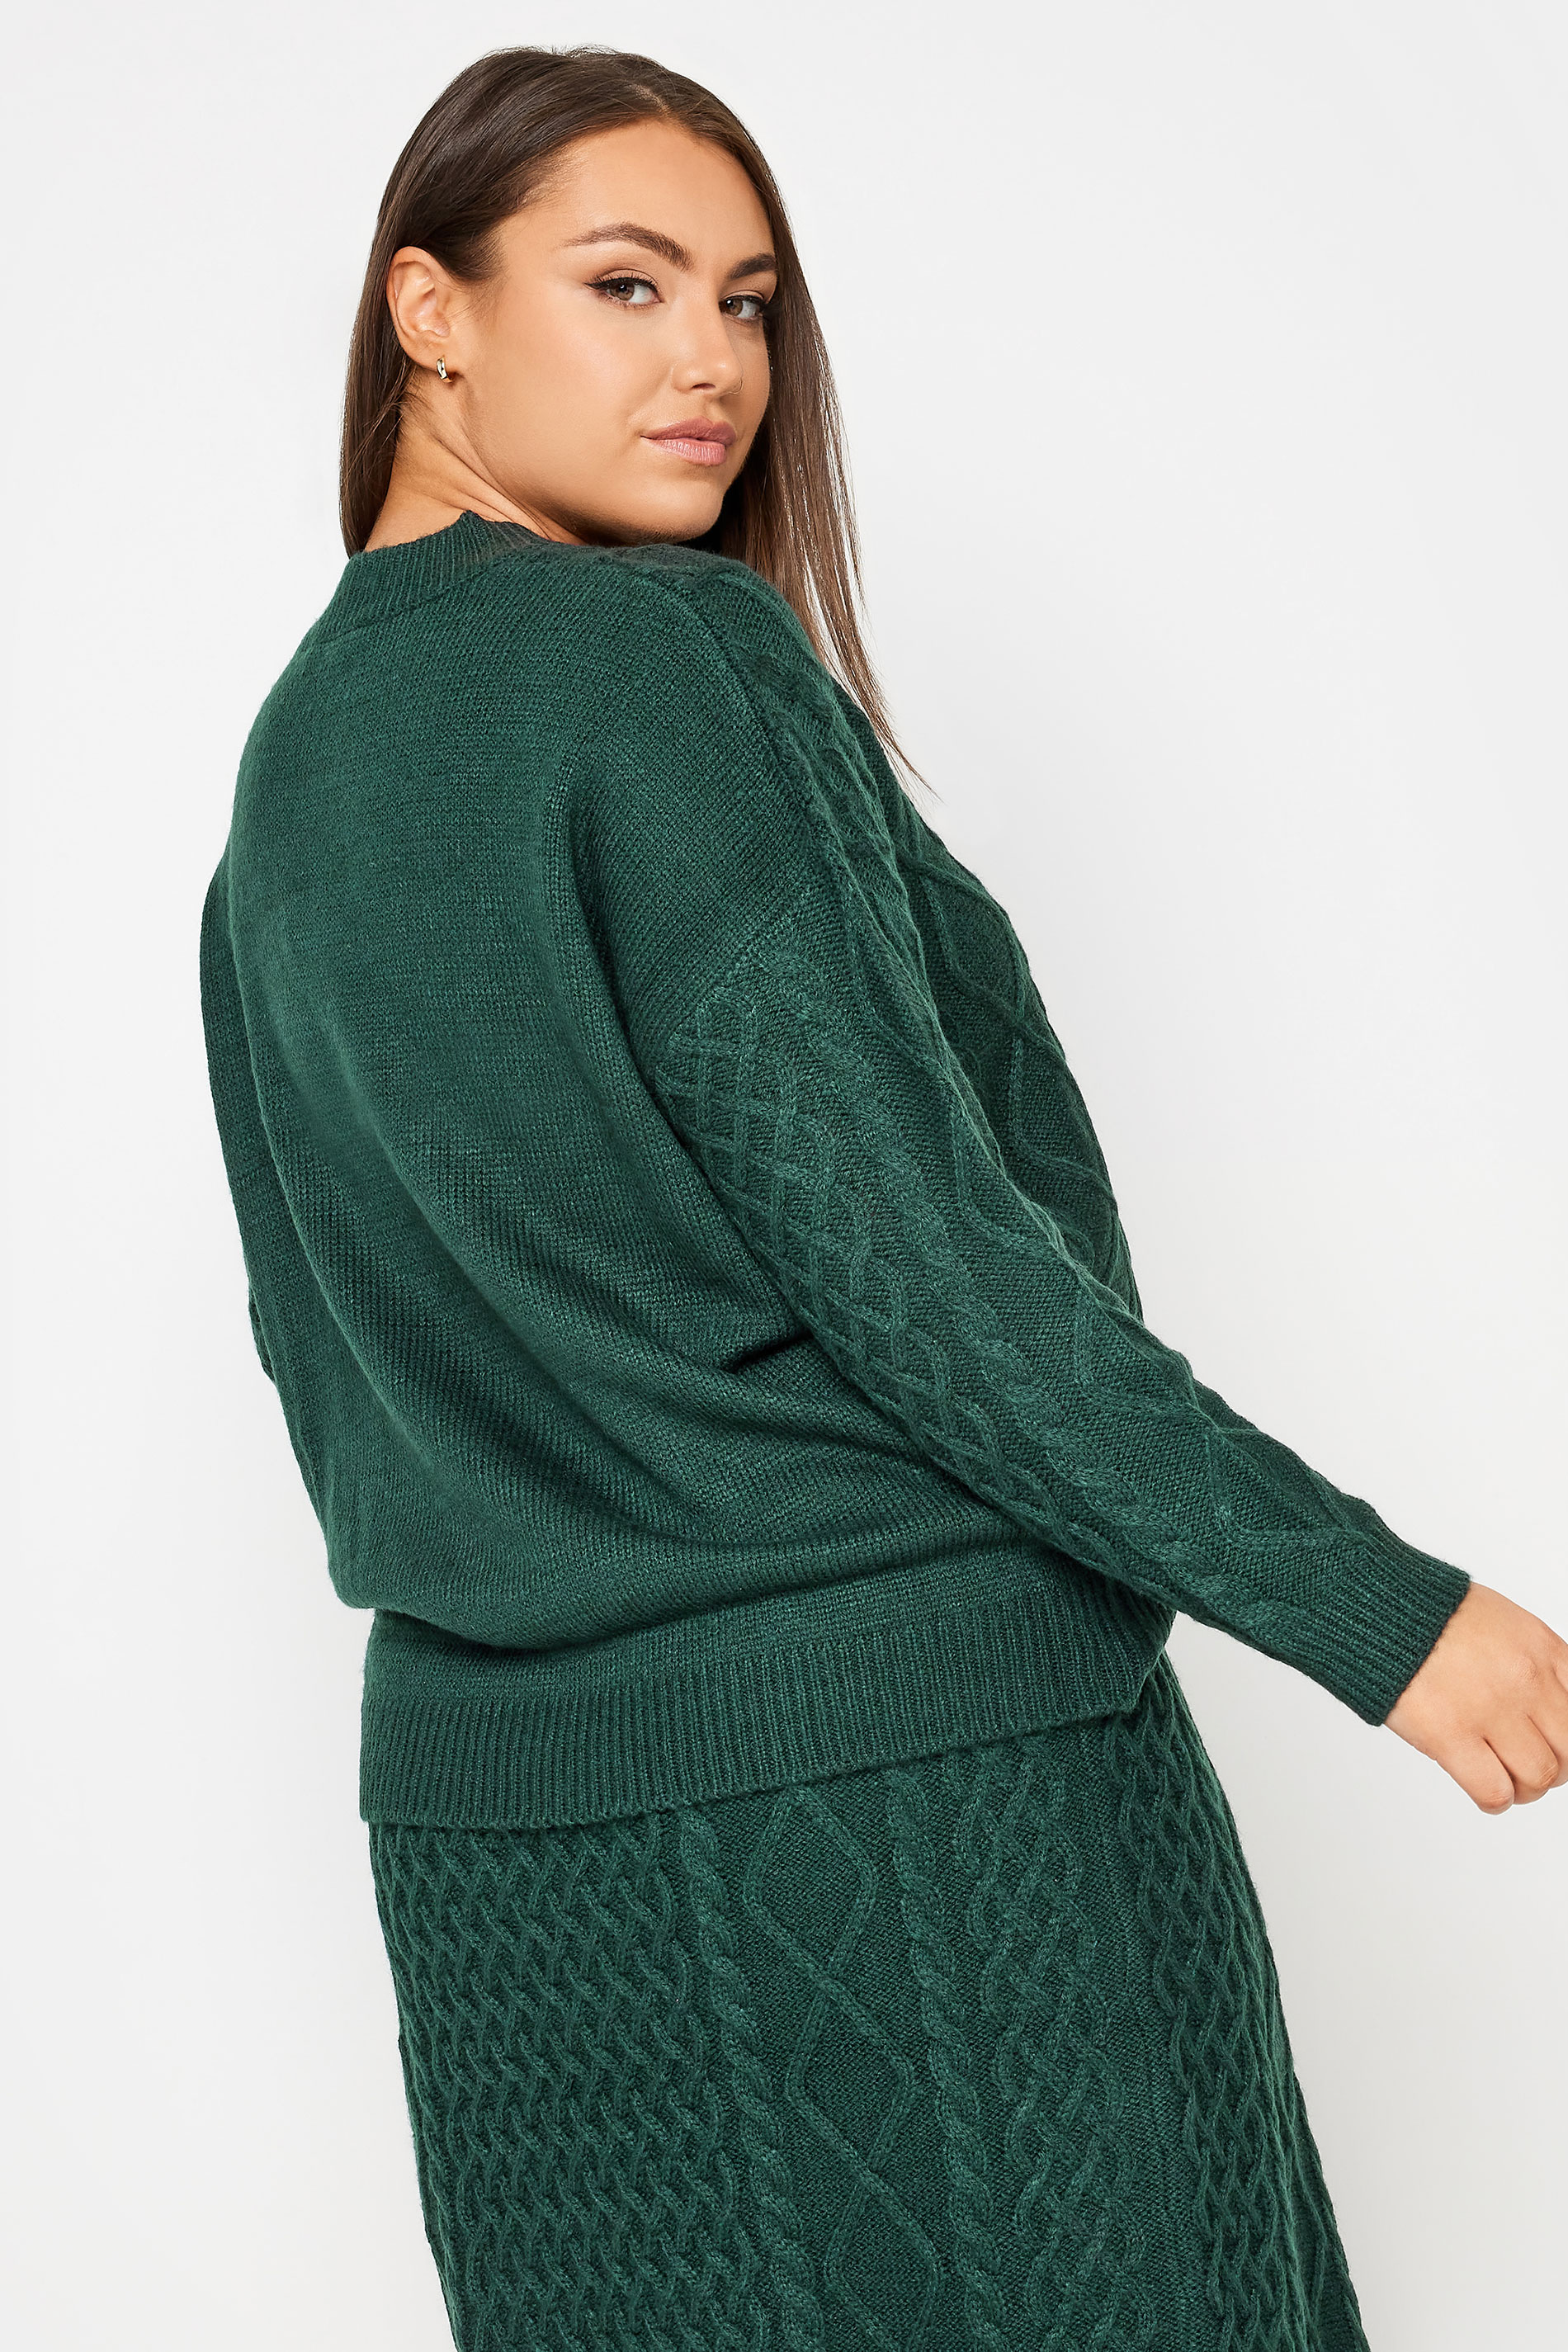 YOURS Plus Size Green Cable Knit Jumper | Yours Clothing 3